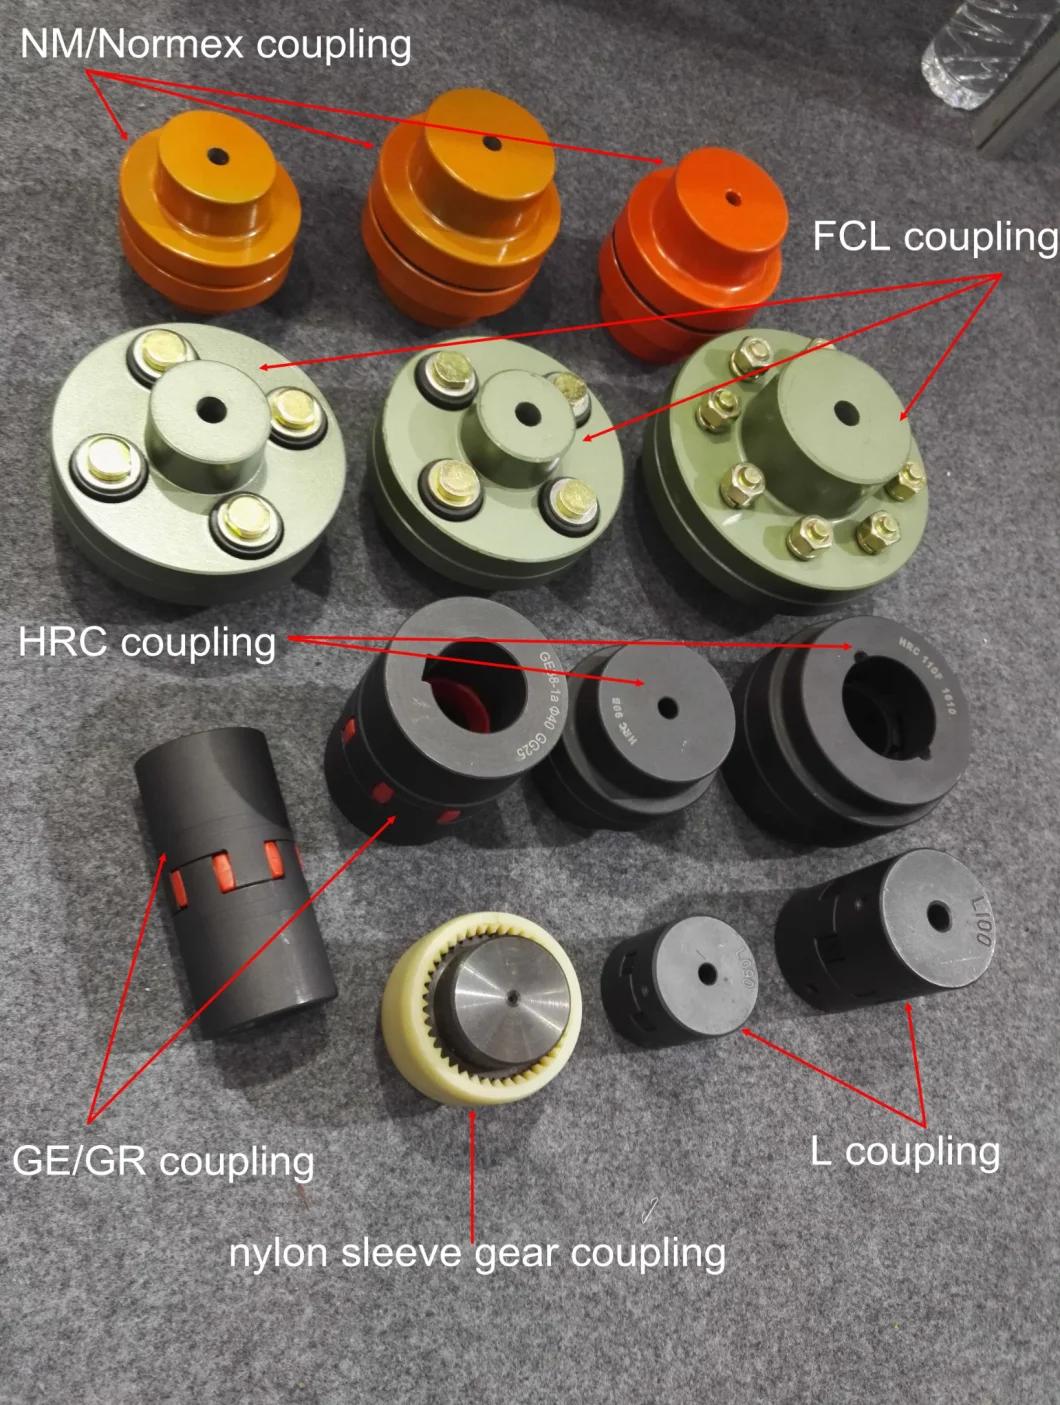 Hot Sale Flexible Disc Coupling-Tubular Double Disc Type /DC-T2 Series/for Servomotor, Stepmotor Connect